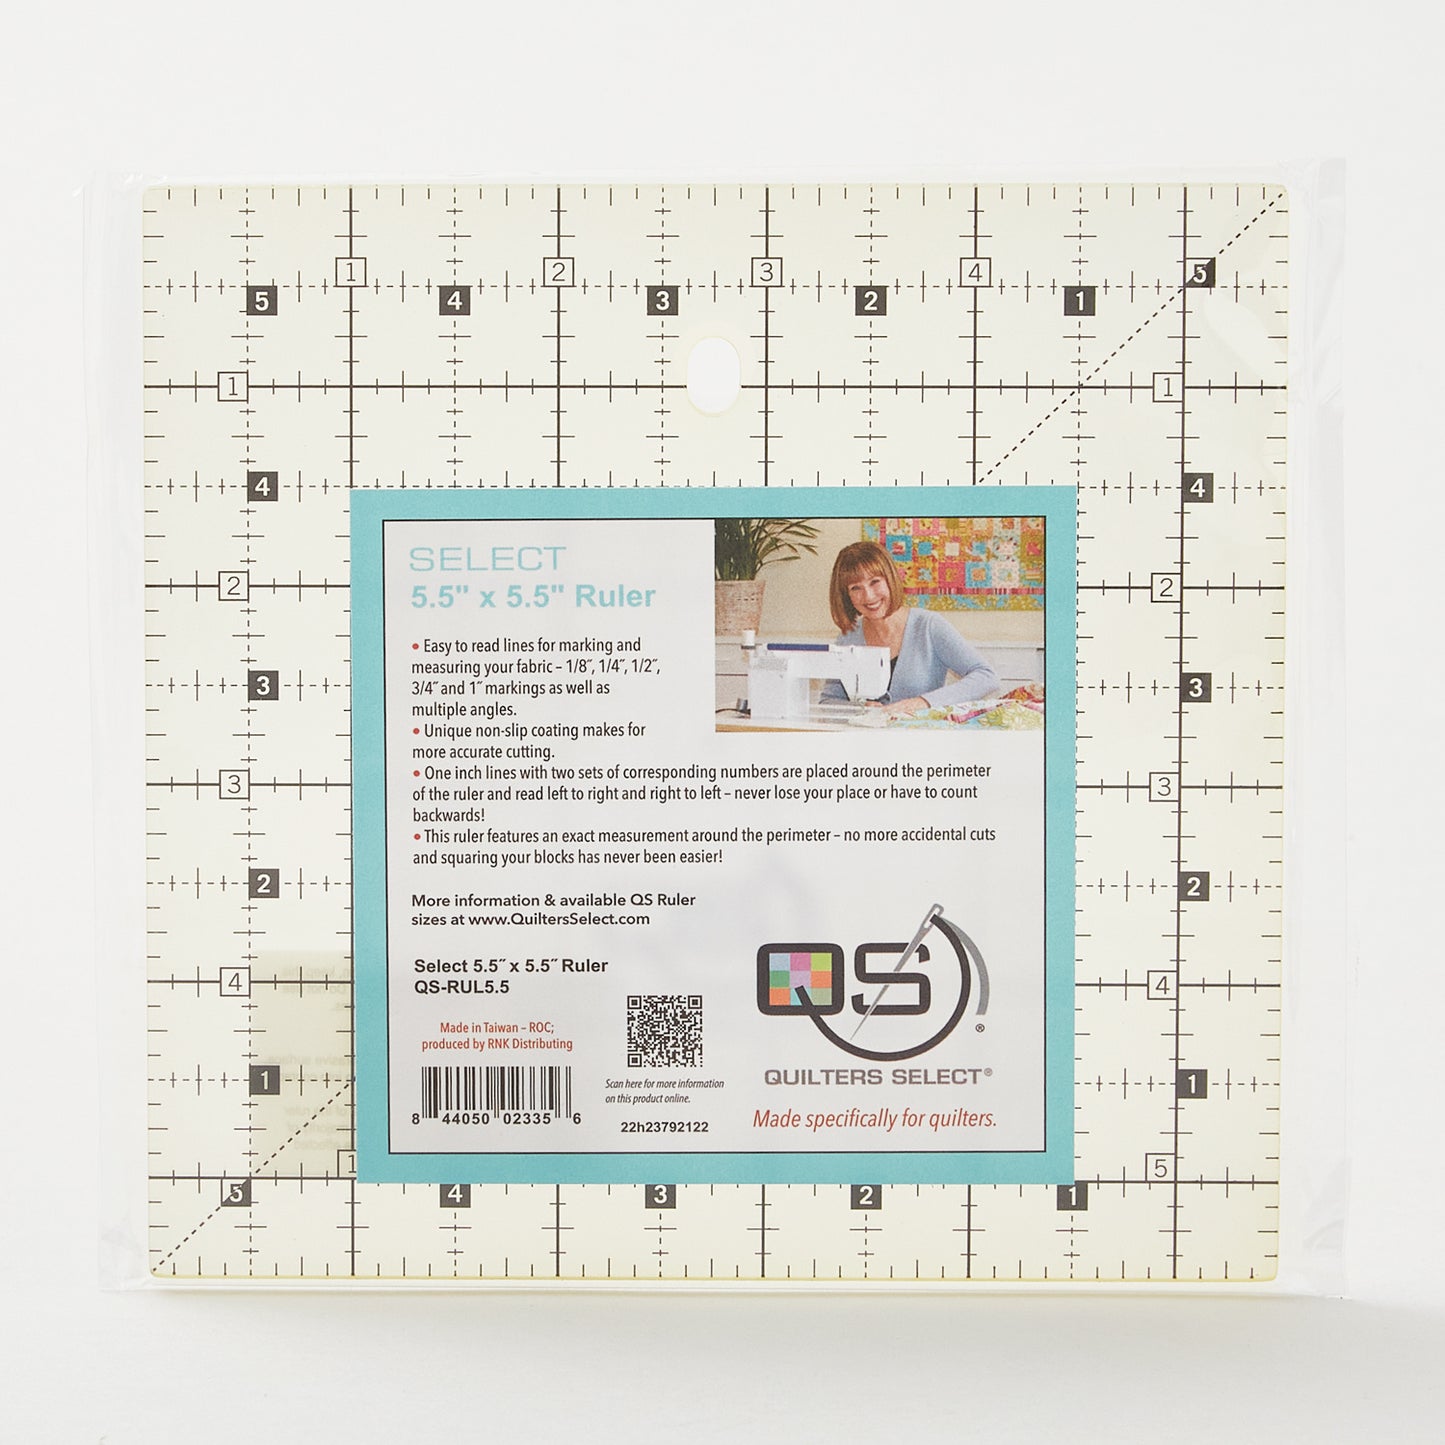 Quilters Select Non-Slip Ruler - 5.5" x 5.5" Alternative View #1